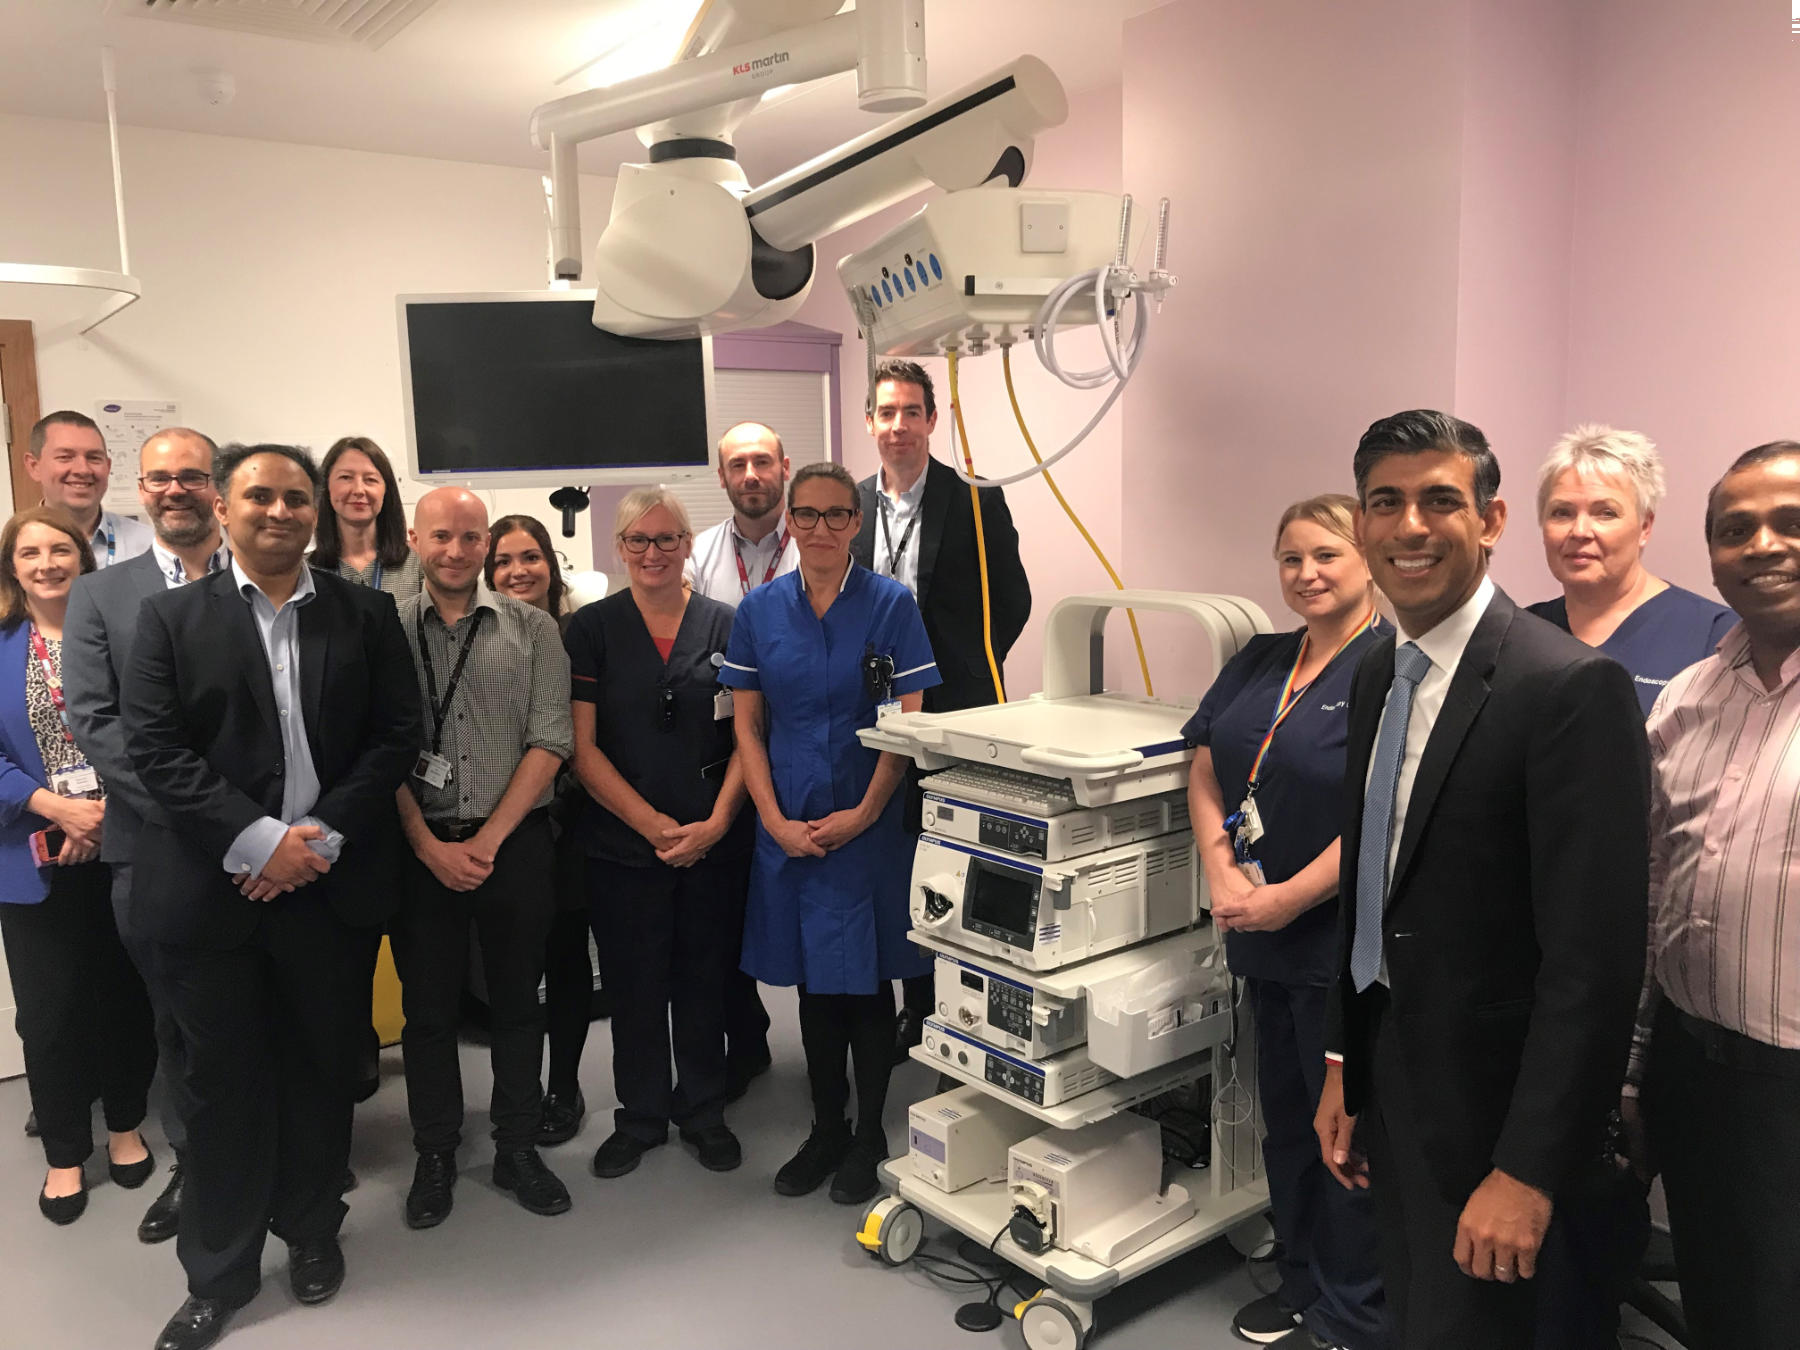 New £5million diagnostic hub comes to the Friarage Hospital